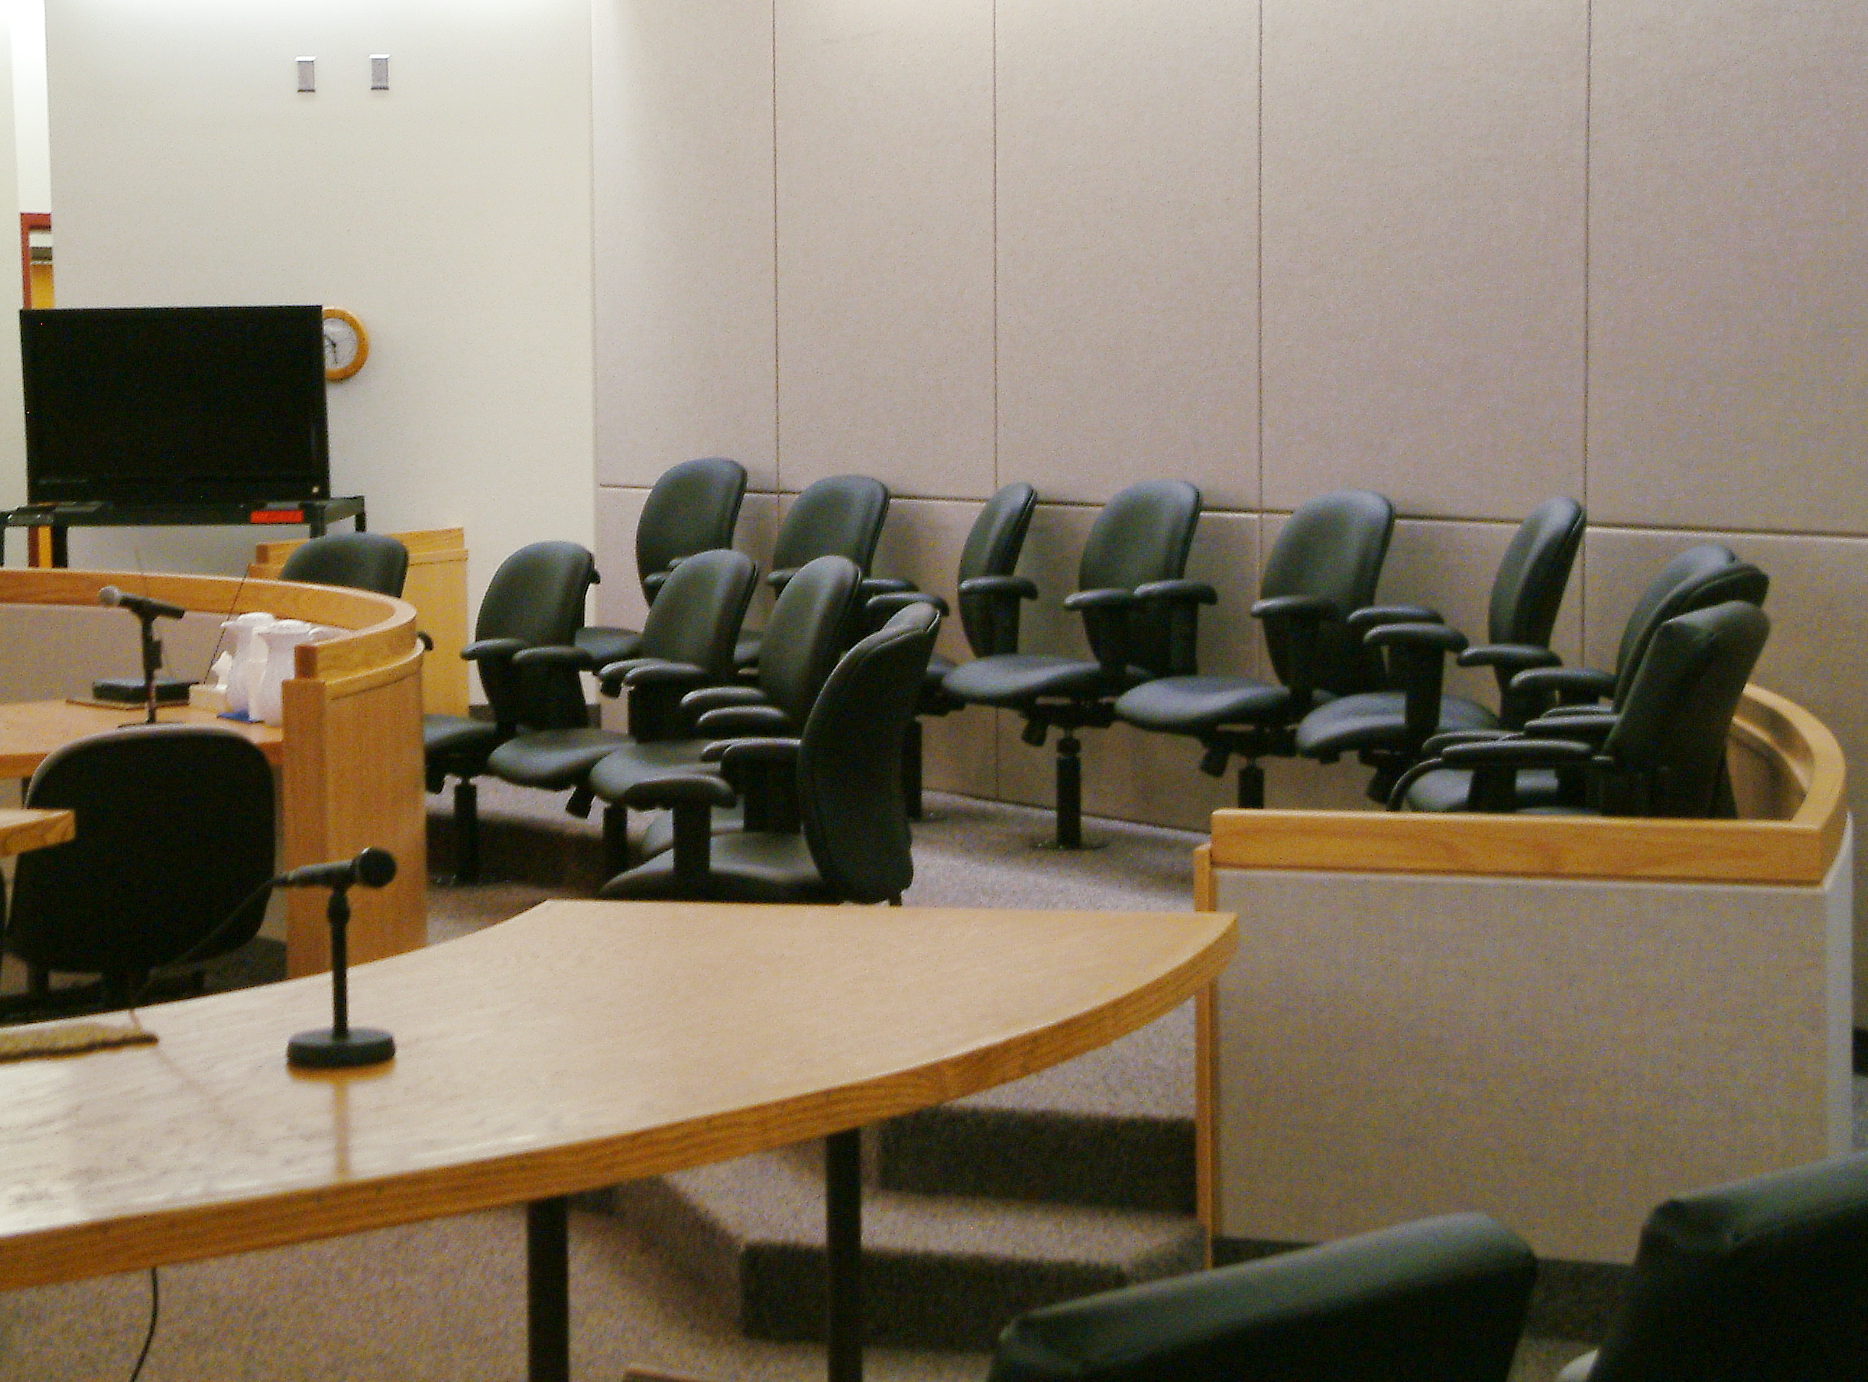 View of the jury box in one of the courtrooms in the Dimond Courthouse in Juneau. (Photo by Matt Miller, KTOO - Juneau)